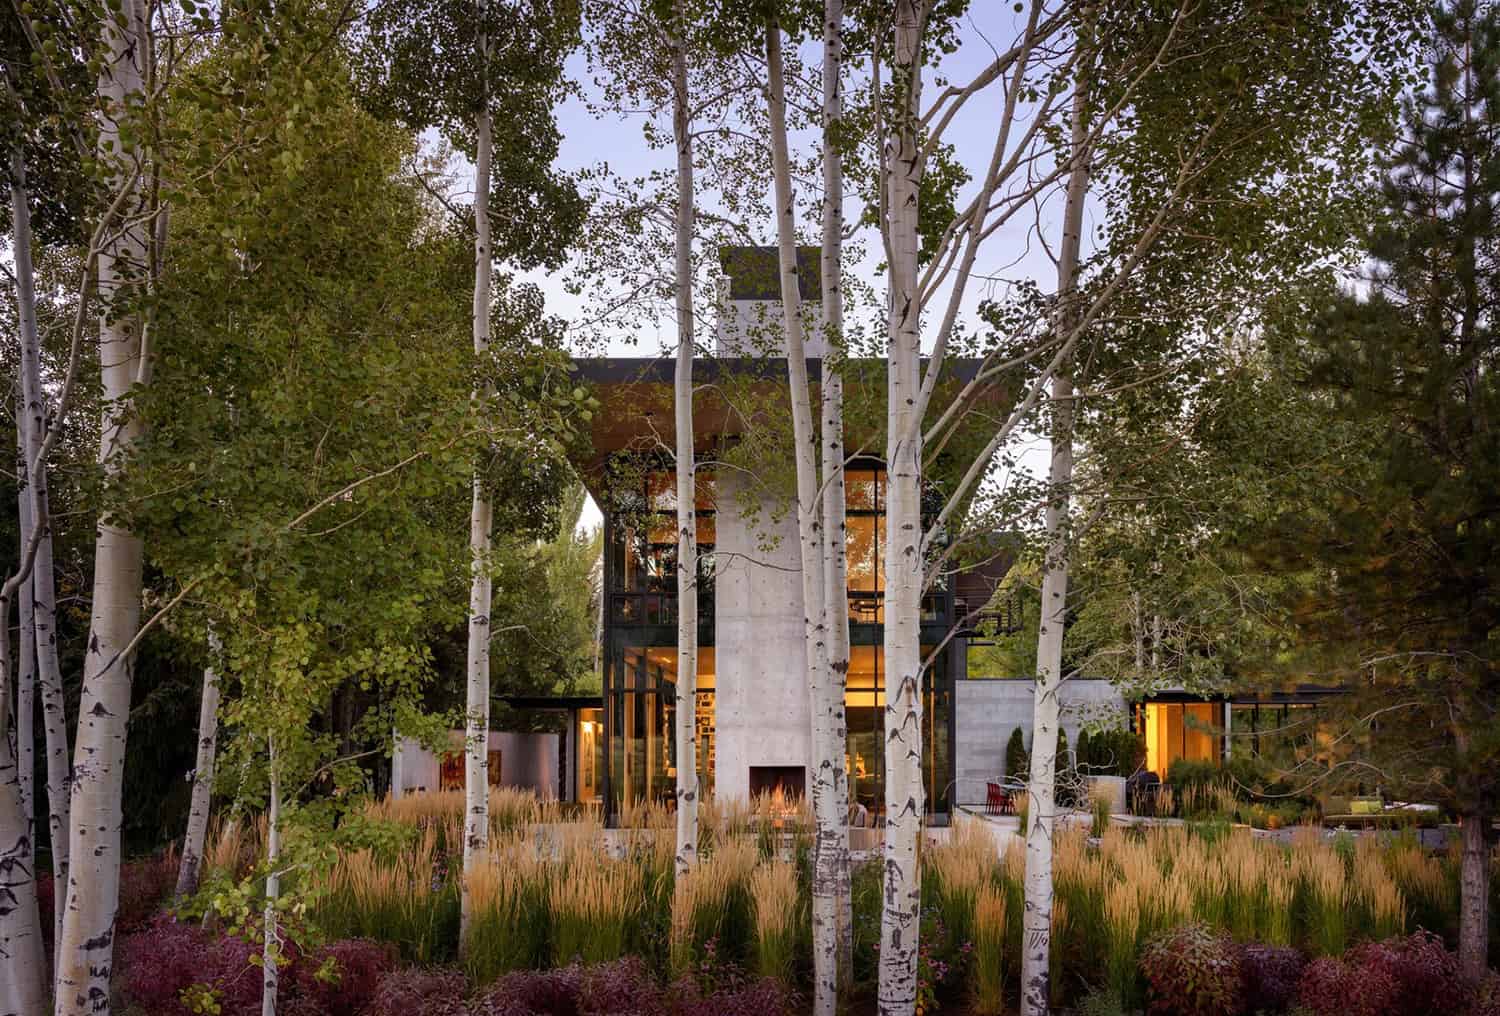 This California Wine Country house nests peacefully in the forest